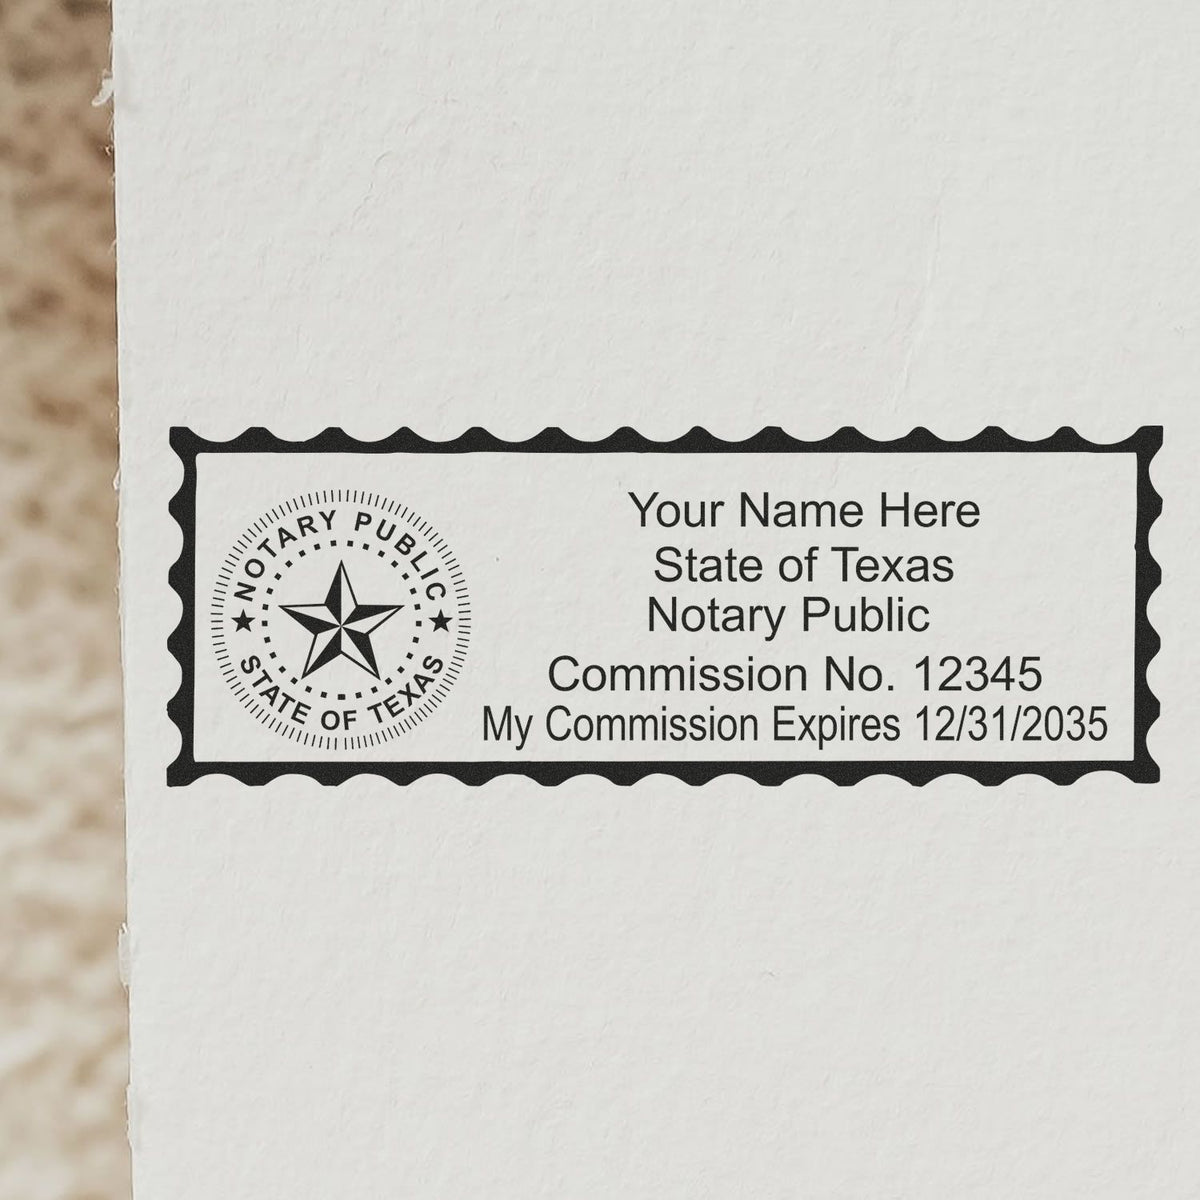 The Slim Pre-Inked State Seal Notary Stamp for Texas stamp impression comes to life with a crisp, detailed photo on paper - showcasing true professional quality.